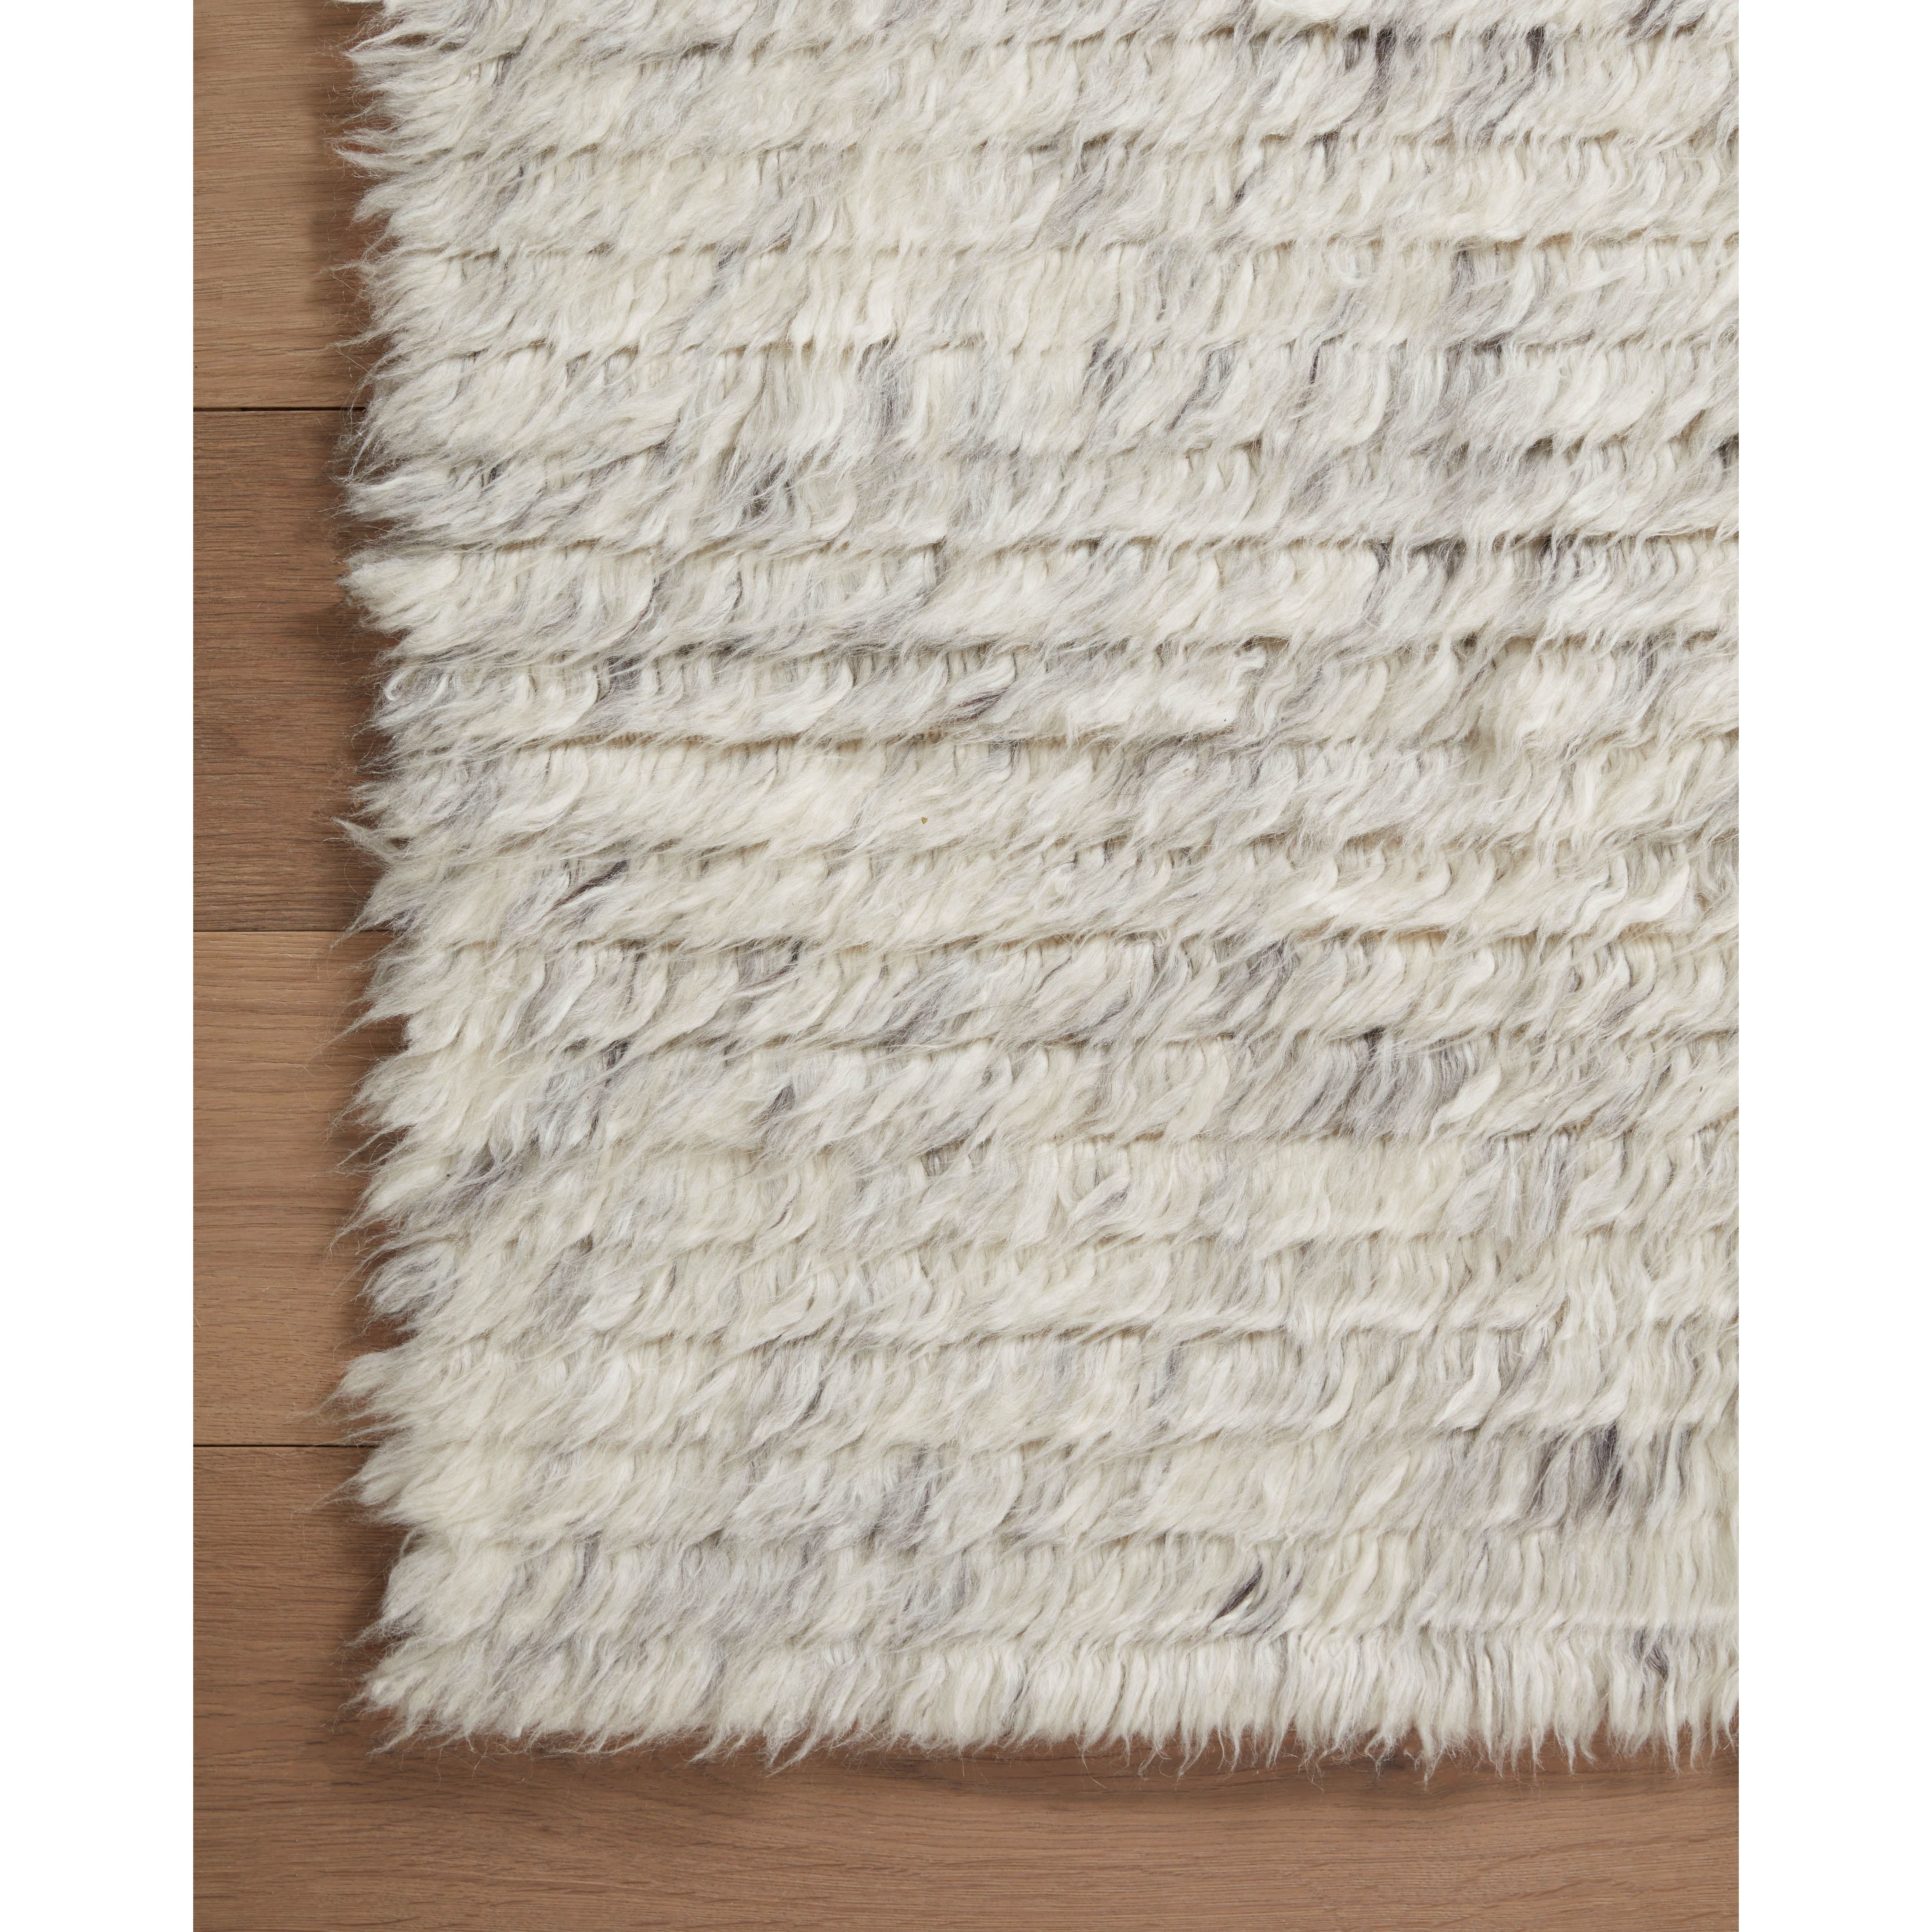 The Amber Lewis x Loloi Woodland Silver Rug has a lush, soft pile inspired by the tree-lined city of Woodland, California. A slightly ridged construction adds dimension and movement to this stylish, modern rug. Amethyst Home provides interior design services, furniture, rugs, and lighting in the Des Moines metro area.